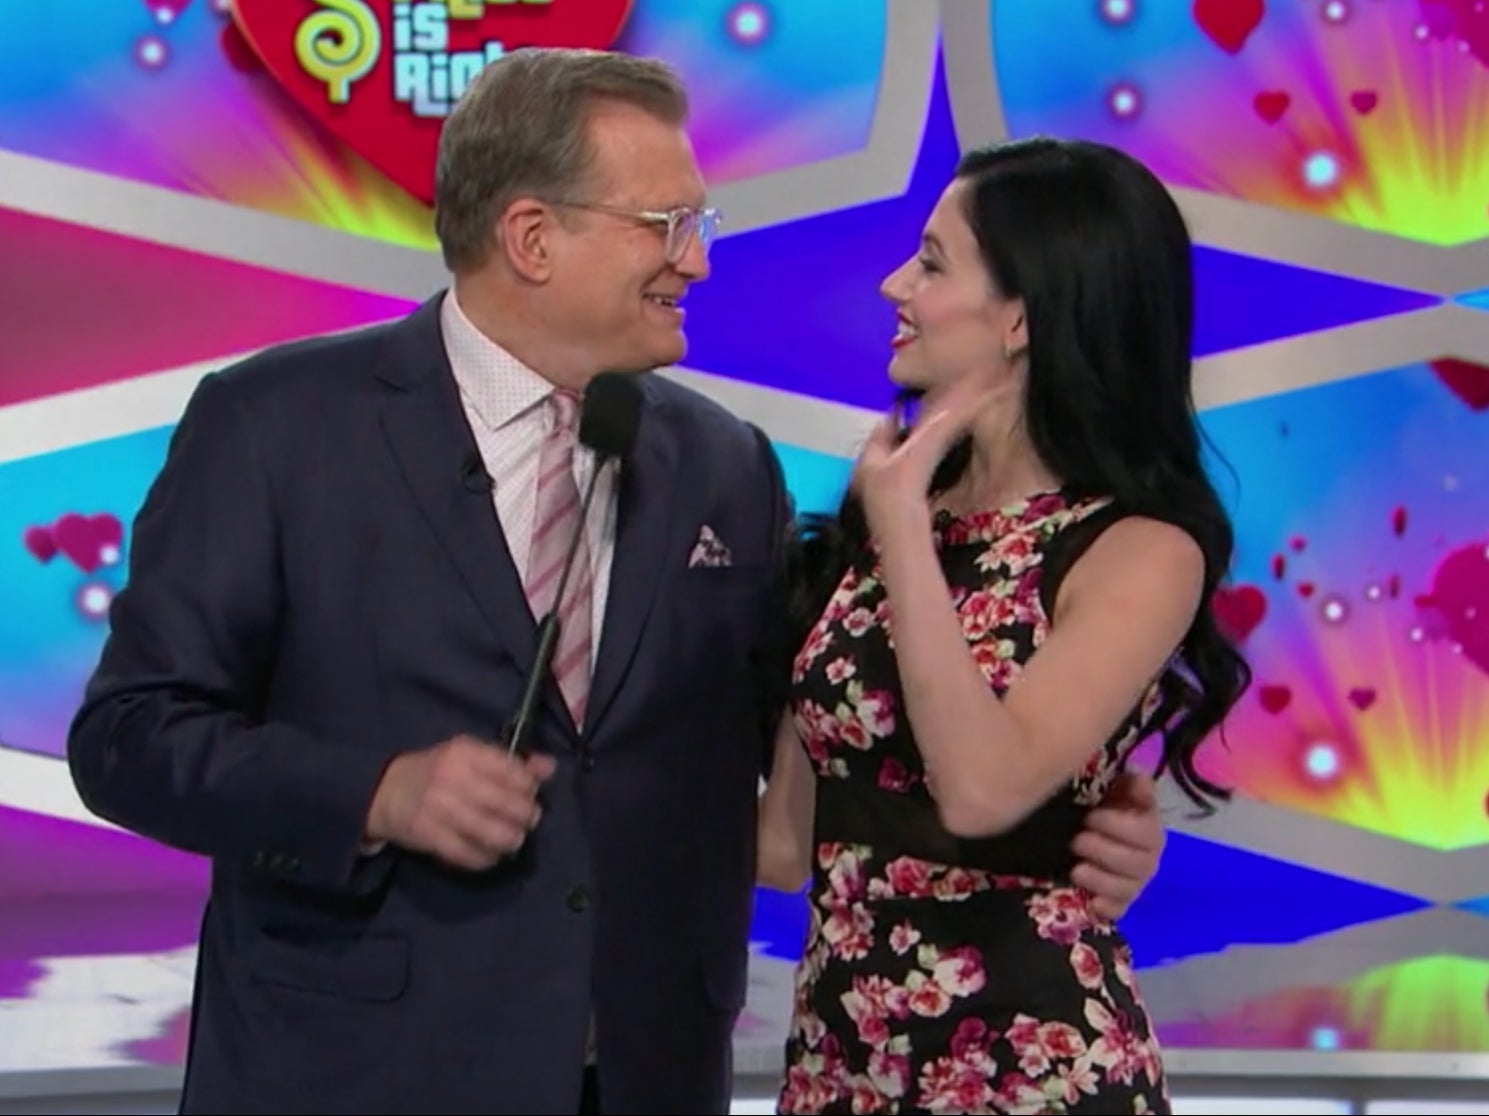 Drew Carey introduces Amie Harwick as his fiancee on the set of ‘The Price is Right’ in 2018